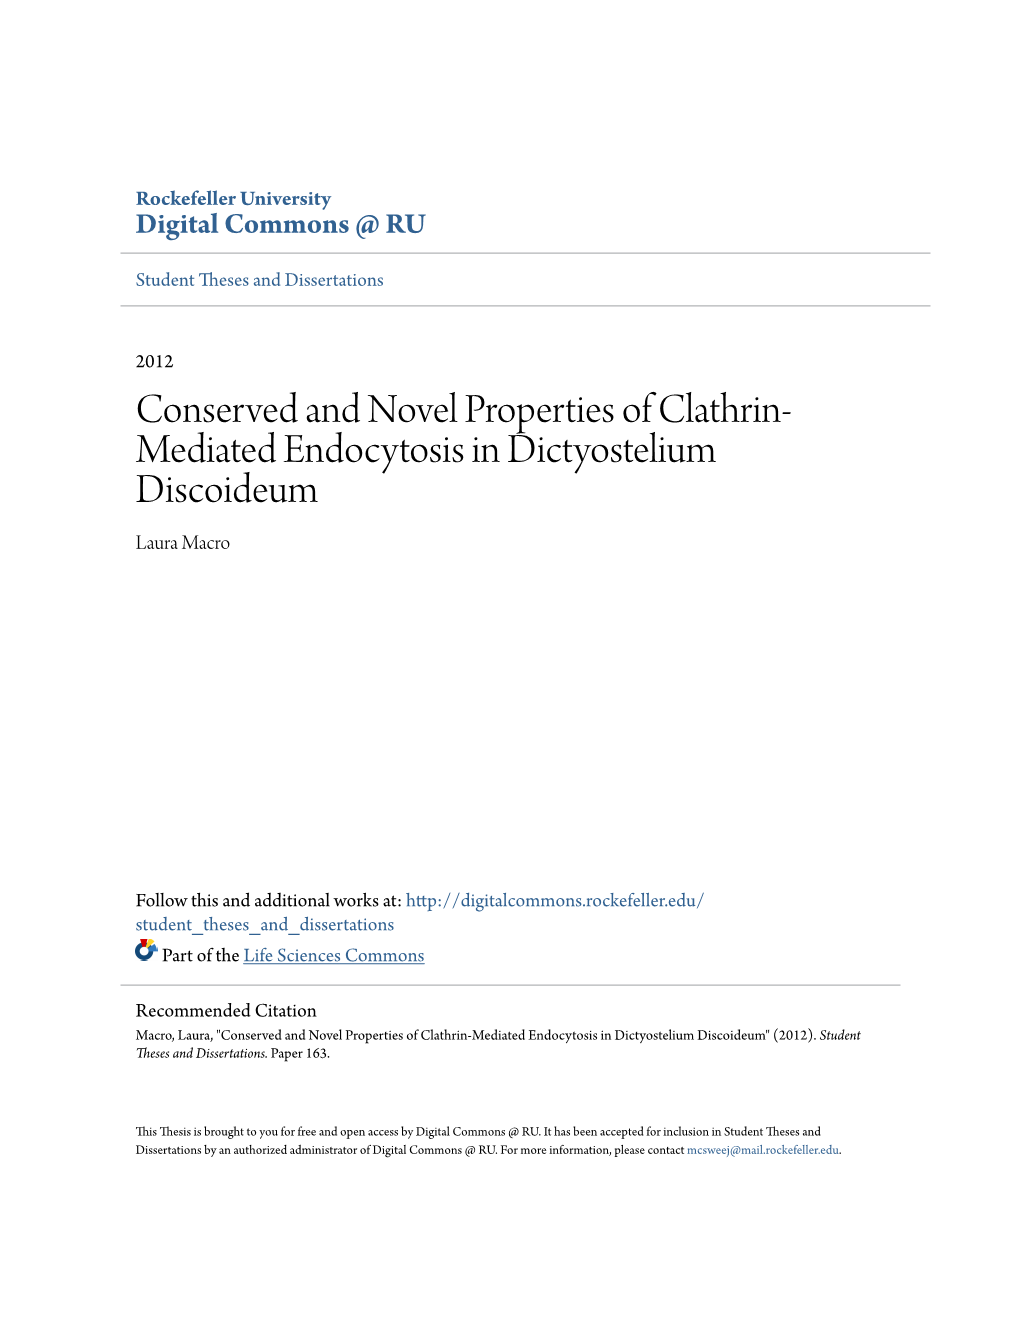 Conserved and Novel Properties of Clathrin-Mediated Endocytosis in Dictyostelium Discoideum" (2012)